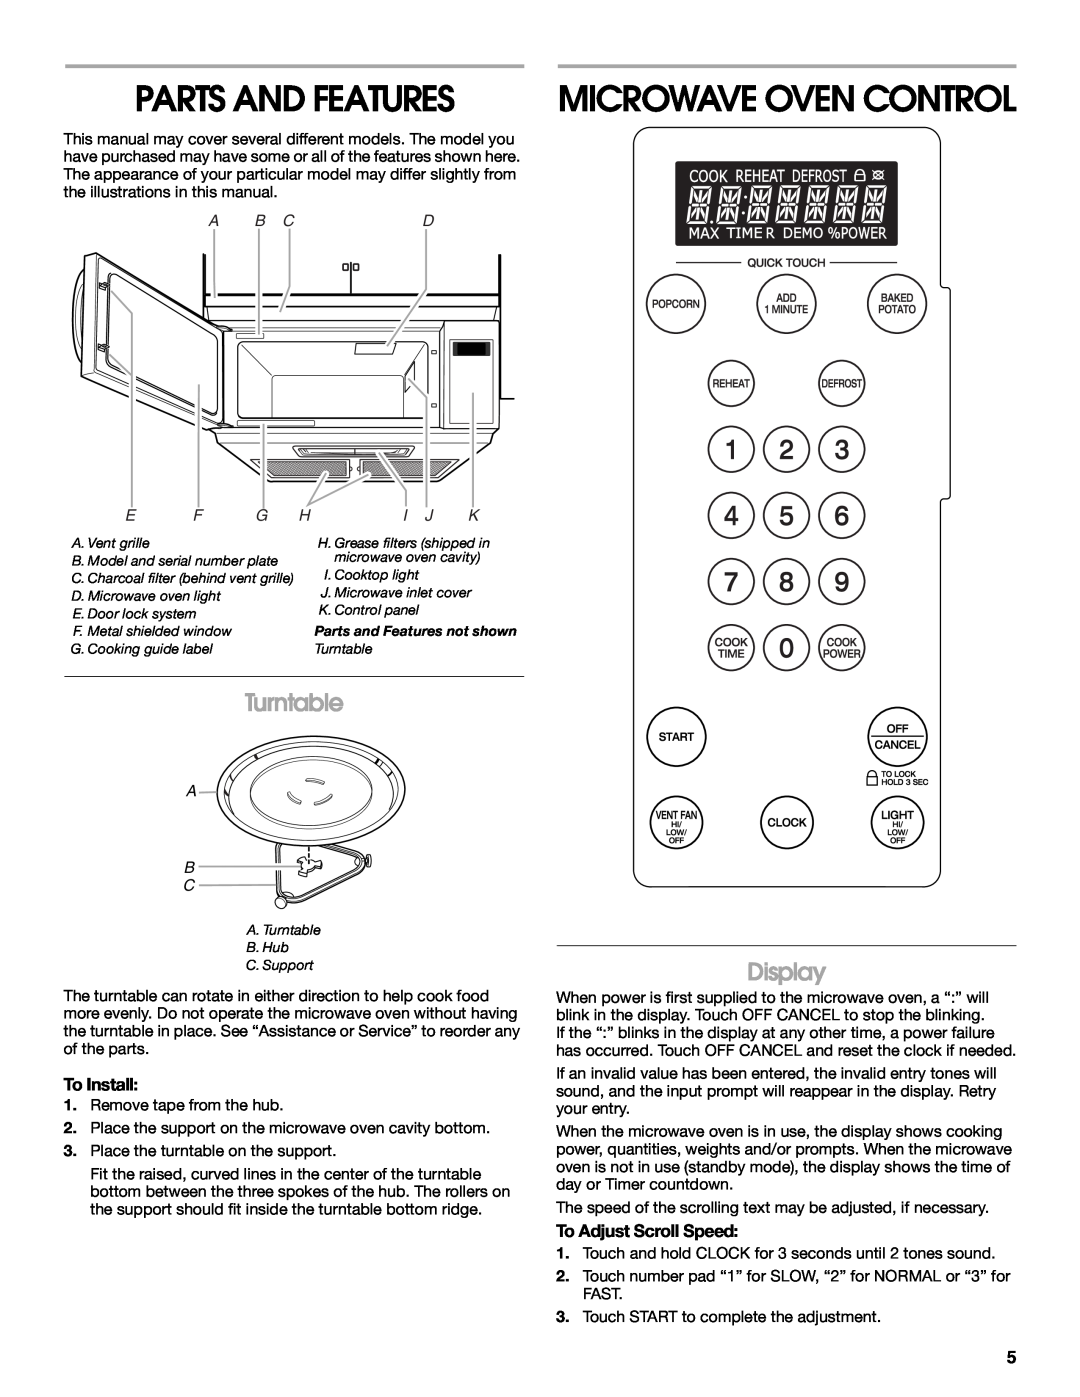 Whirlpool IMH16XS manual Parts And Features, Microwave Oven Control, Turntable, Display, To Install, To Adjust Scroll Speed 